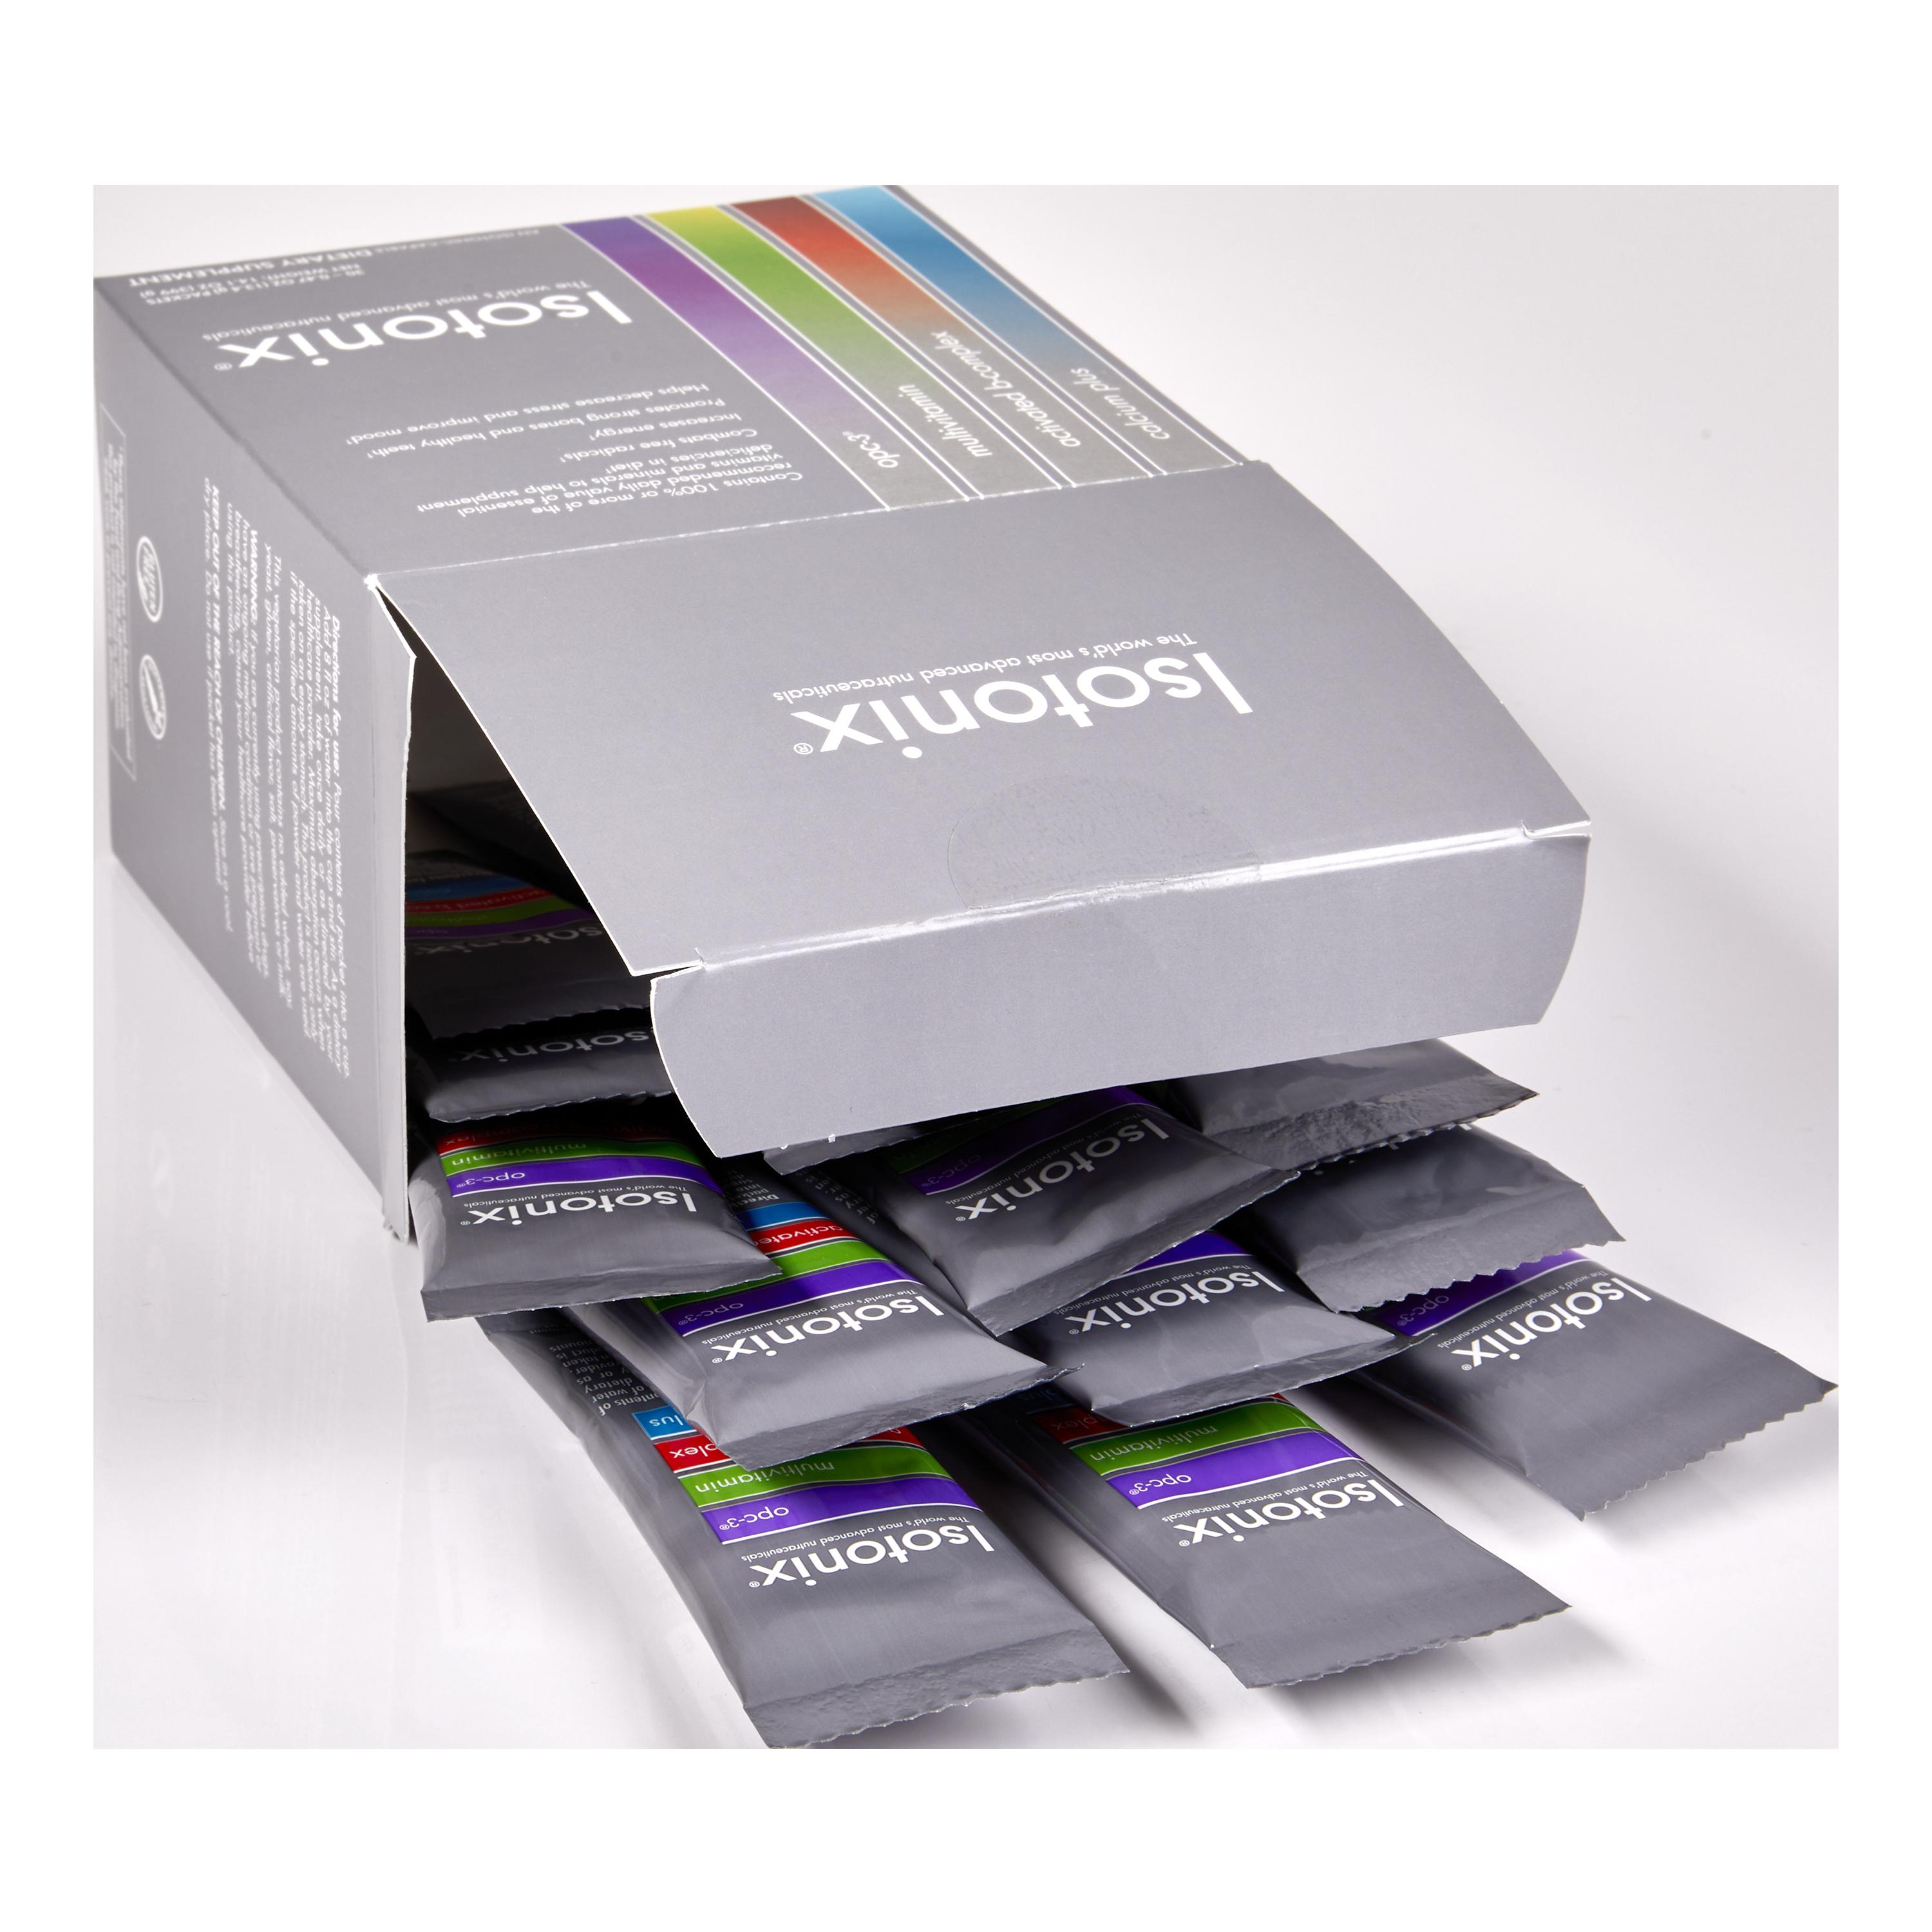 Isotonix&#174; Daily Essentials Packets alternate image